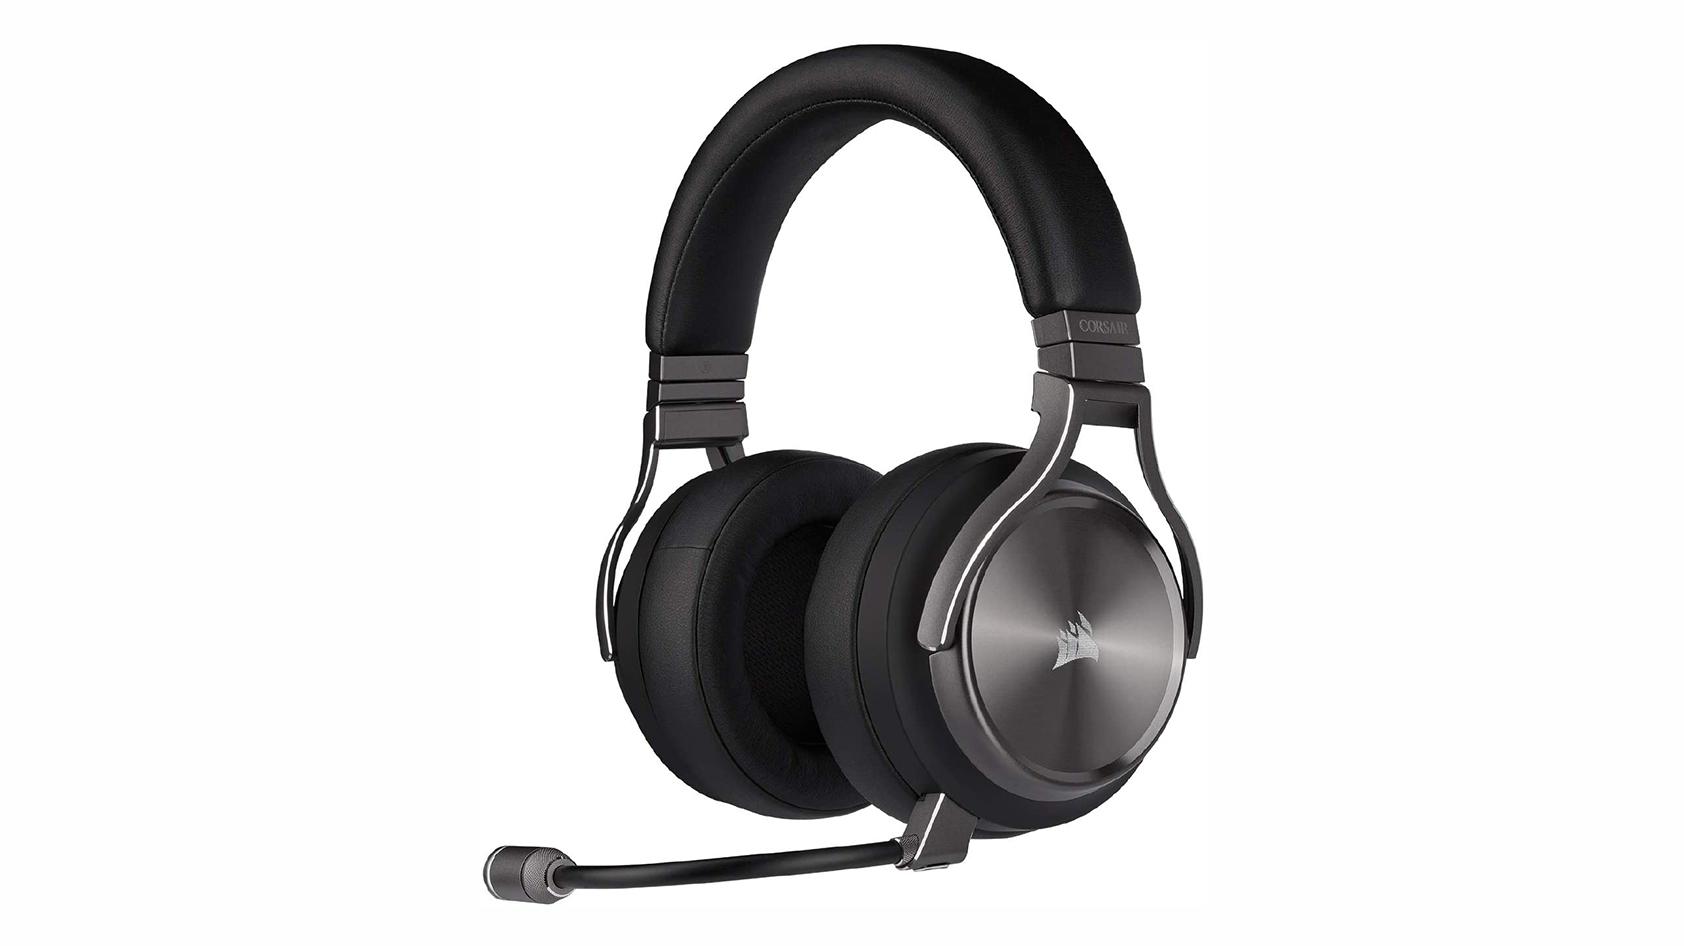 A product image of the Corsair Virtuoso SE gaming headset in silver against a white background.